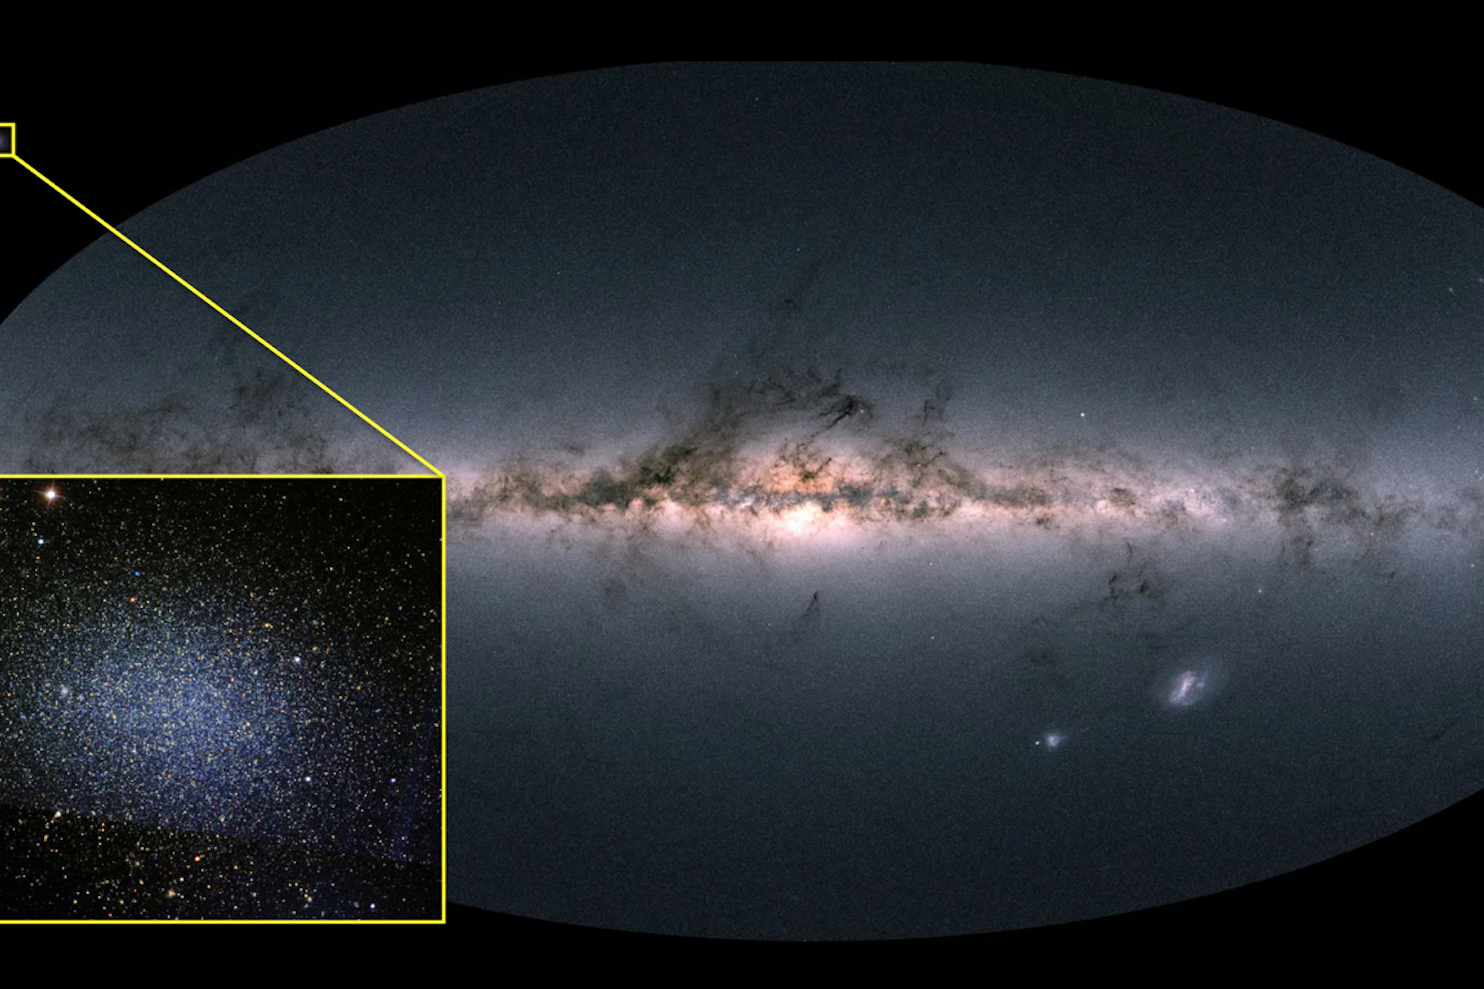 An inset within a larger picture of the Milky Way shows both luminous stars and an apparent anomoly